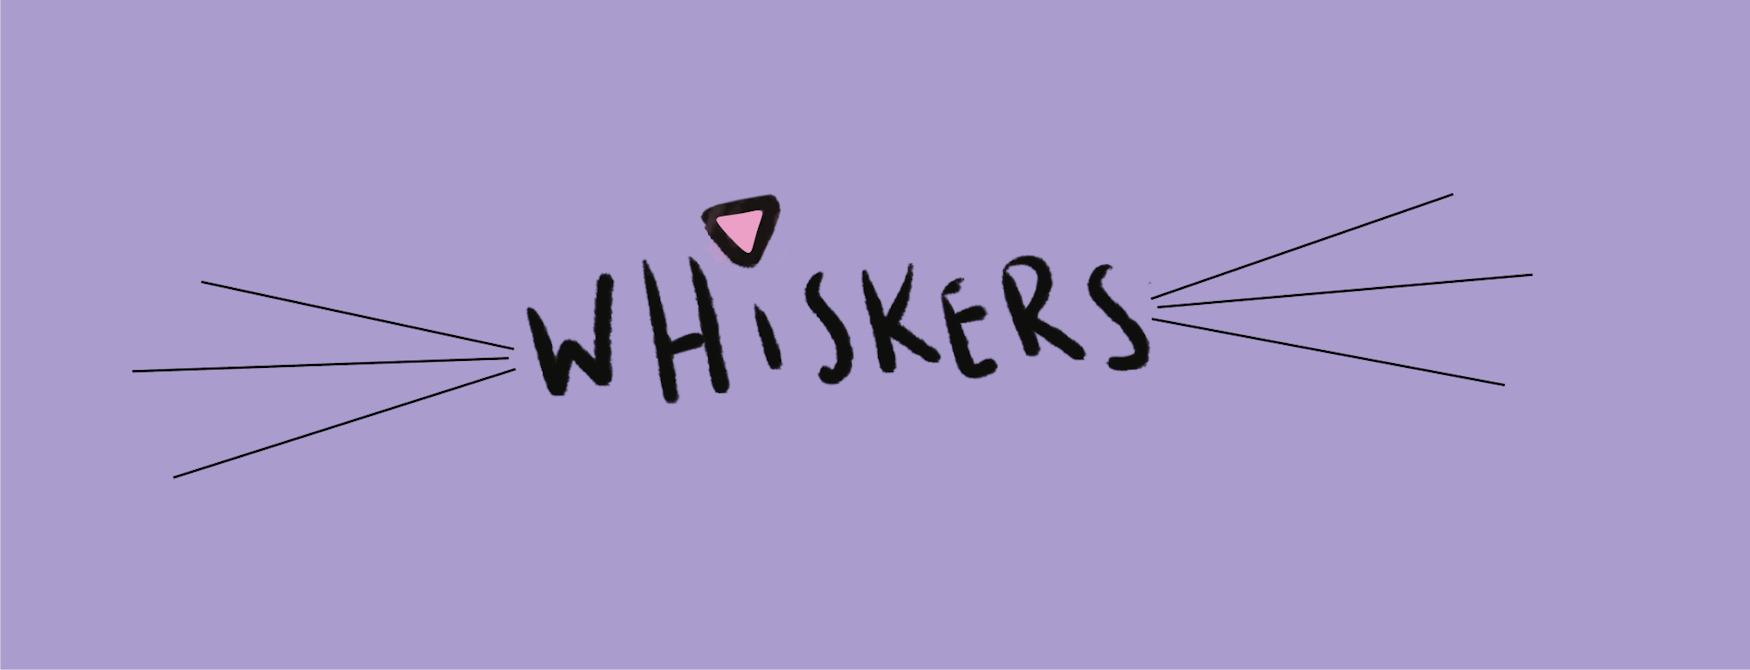 Whiskers Weekly